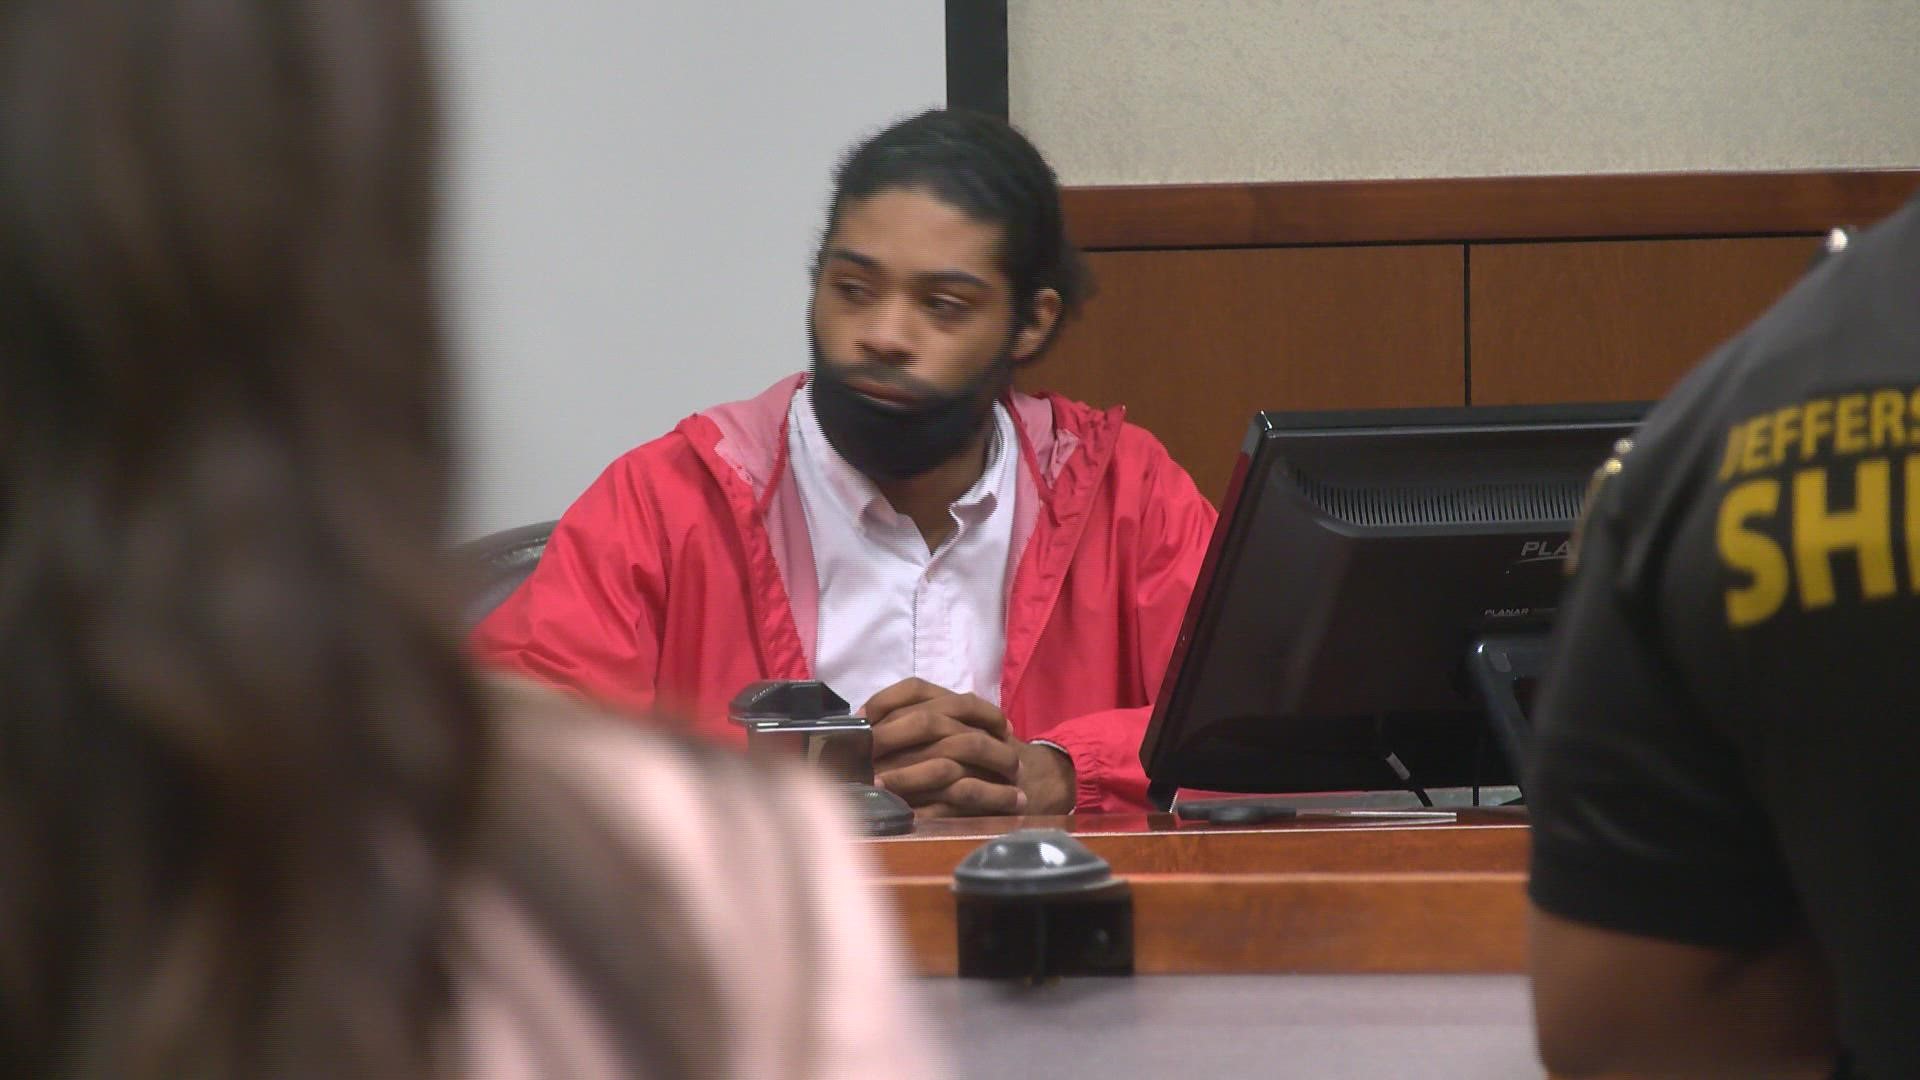 Evan Ross, a key witness in the Kevon Lawless trial was arrested after he was accused of lying on the witness stand during testimony on Monday.